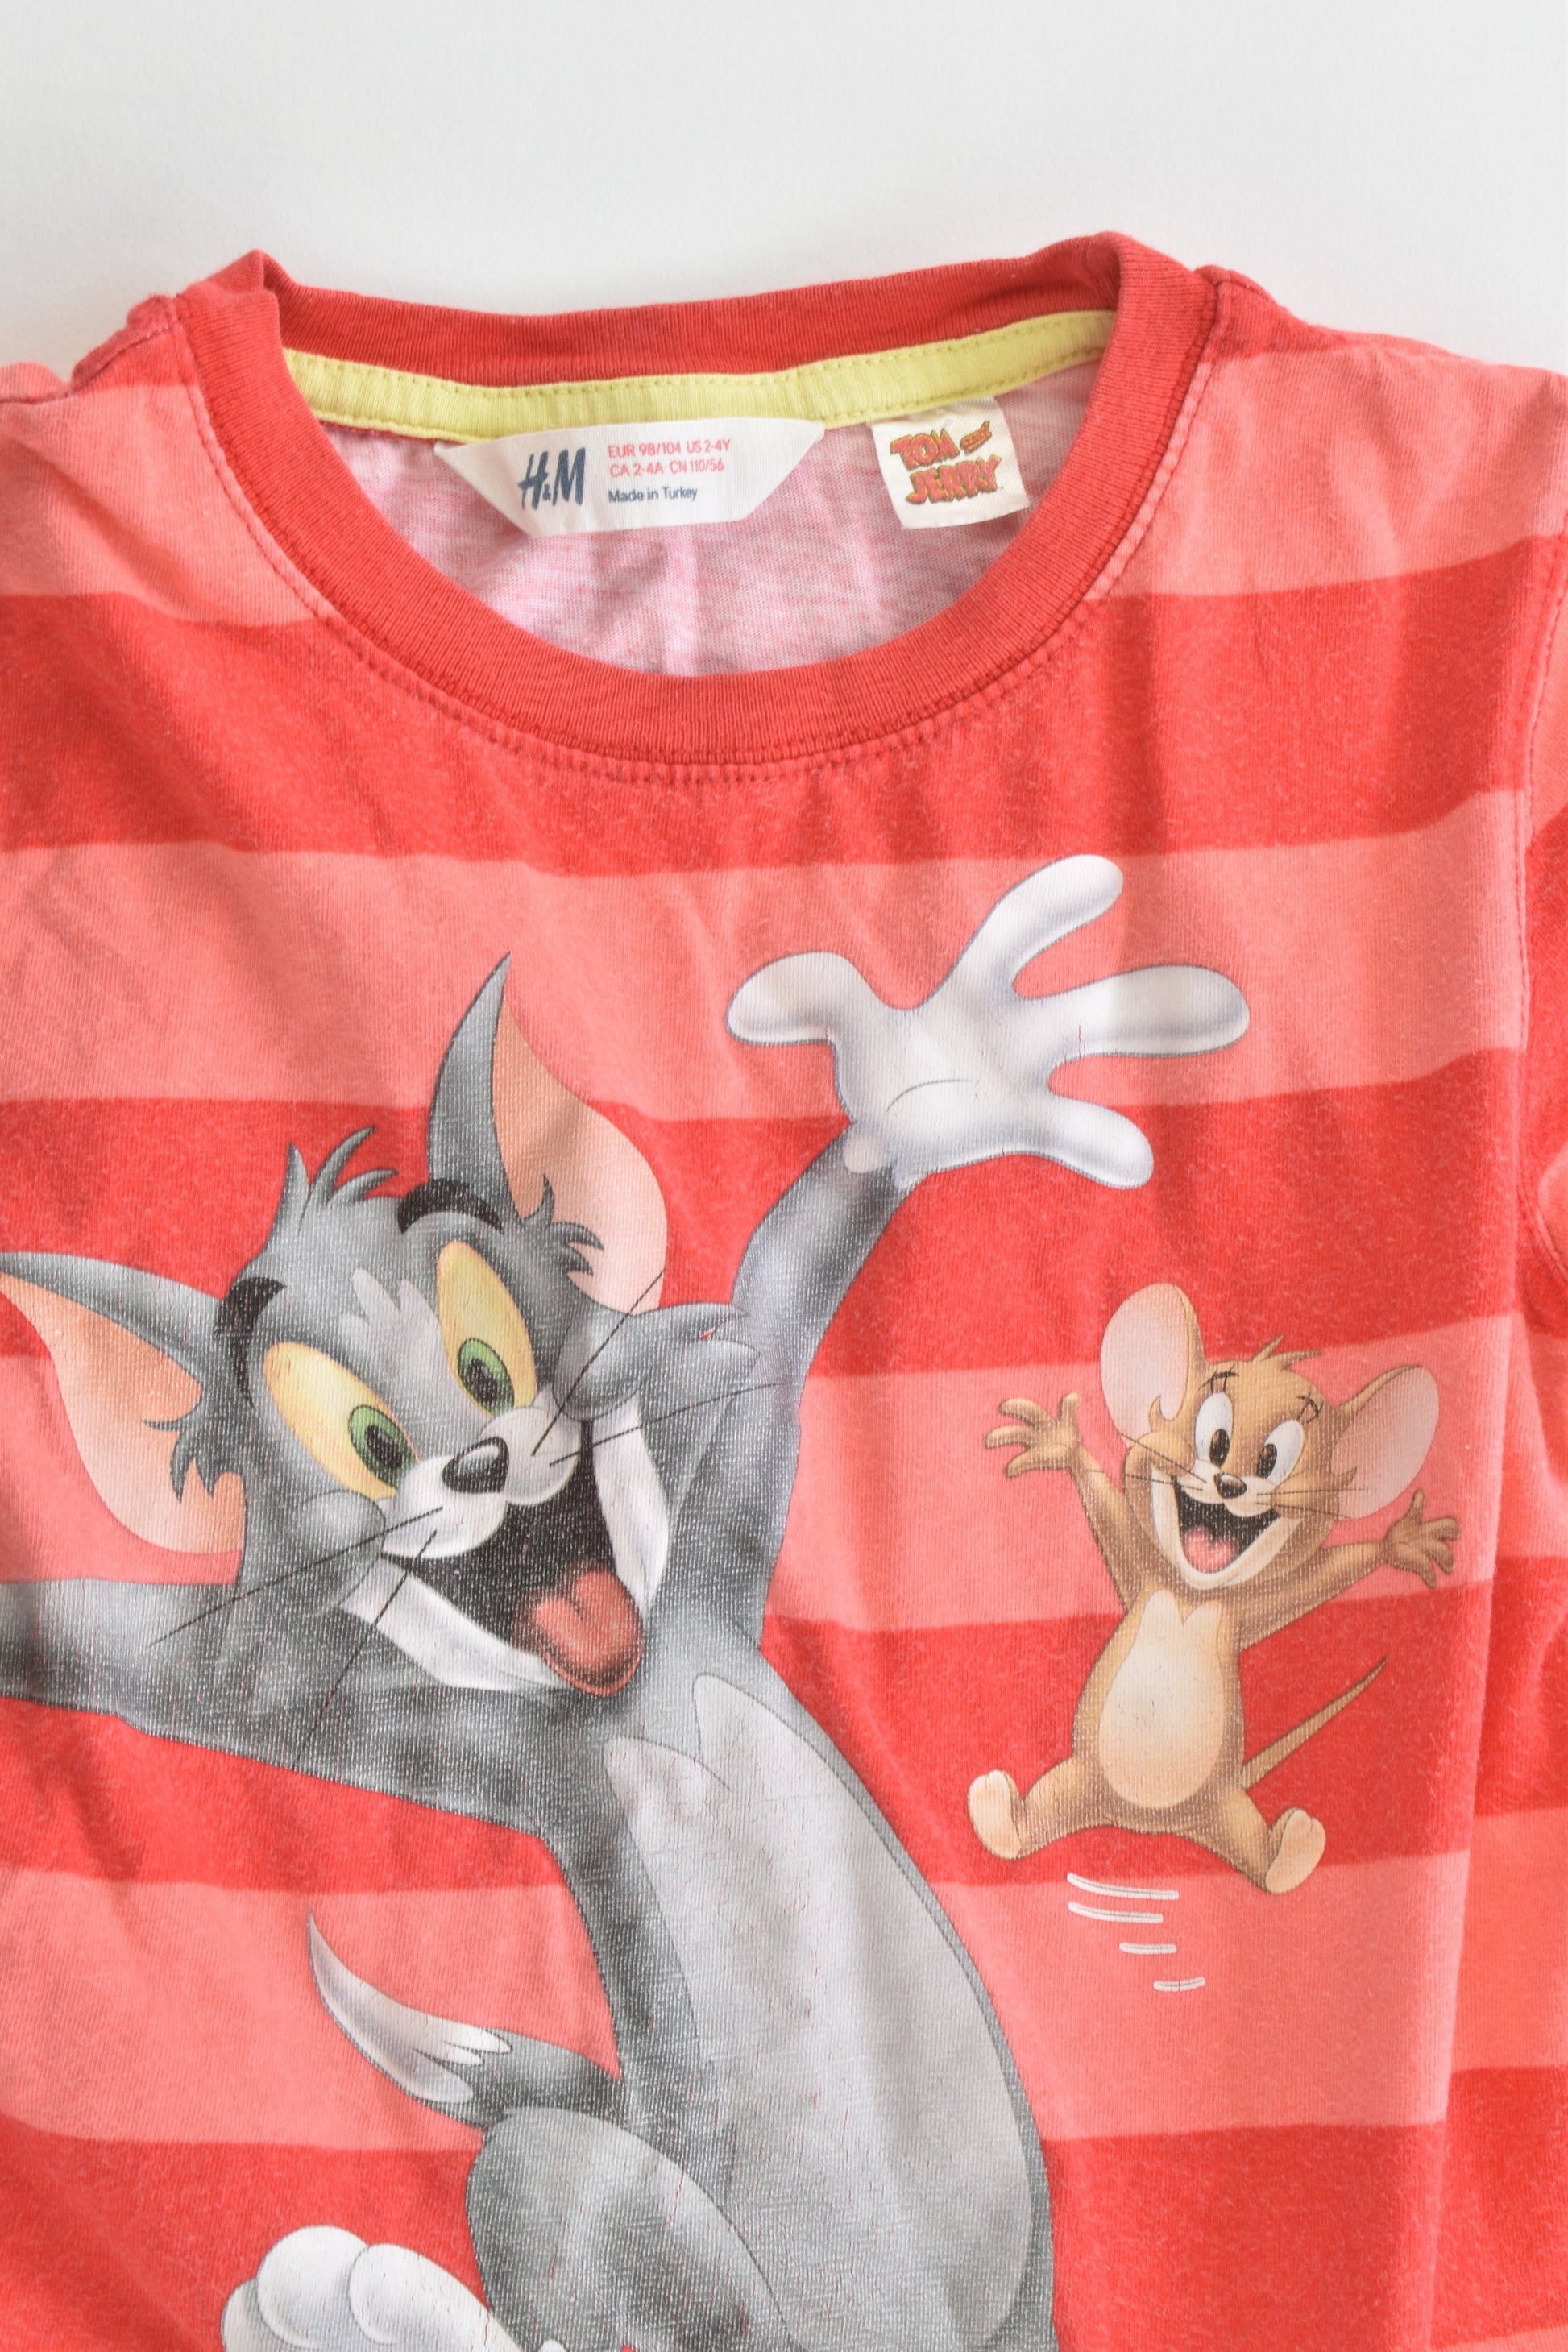 H&M Size 3-4 (98/104 cm) Tom and Jerry T-shirt